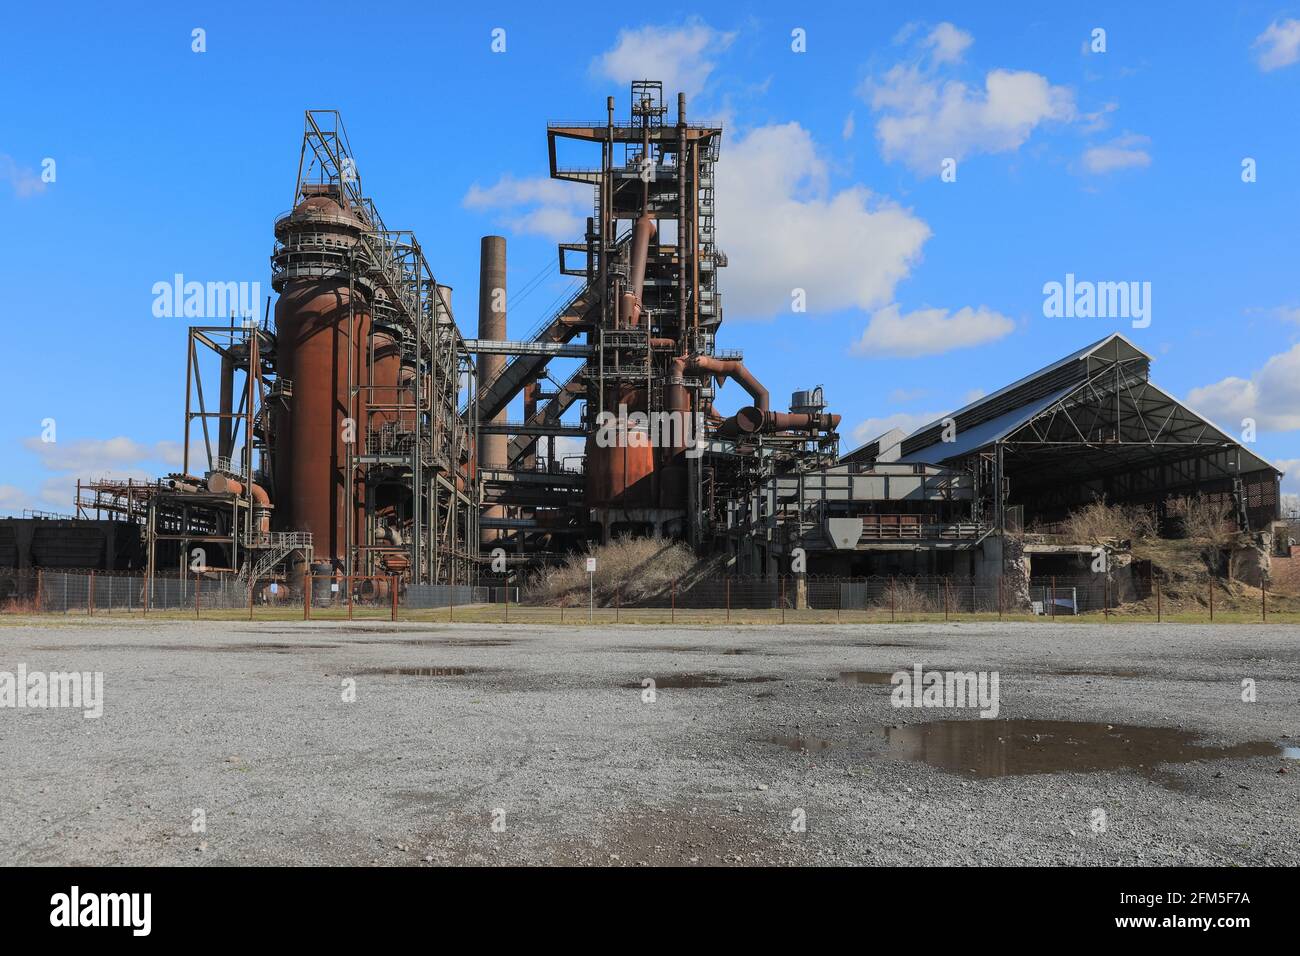 The disused Phoenix West  blast furnace ironworks and steelworks, formerly part of ThyssenKrupp Steel  in Dortmund, Germany Stock Photo